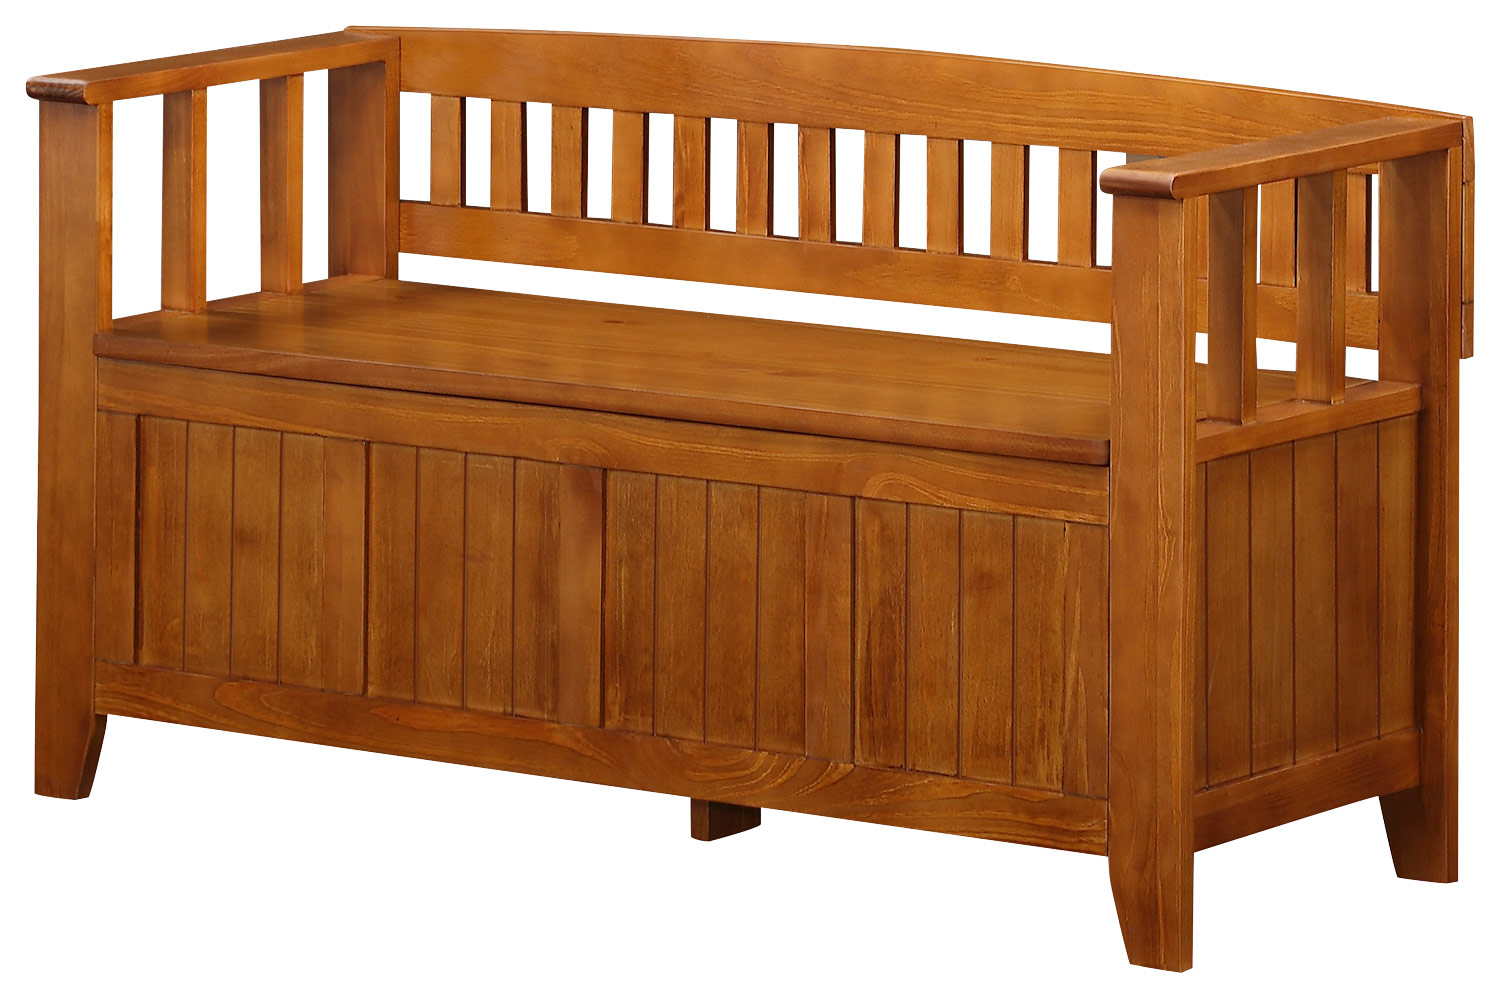 Simpli Home - Acadian Storage Bench - Light Avalon Brown was $229.99 now $179.99 (22.0% off)